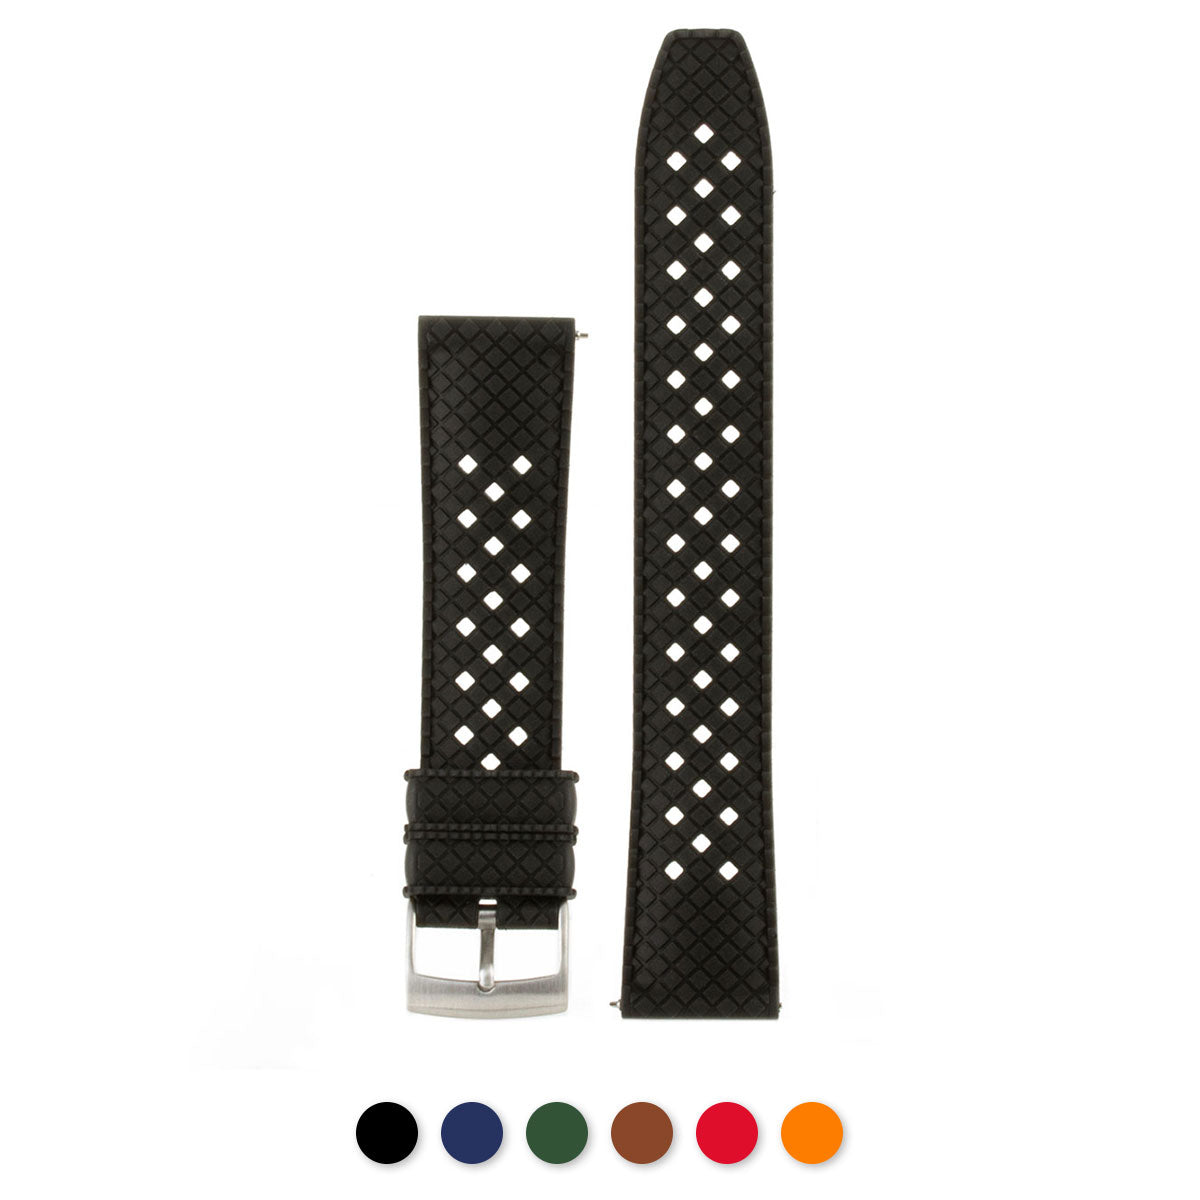 "Driver" Capsule Tropic watch band - Rubber (black, brown, green, red...)